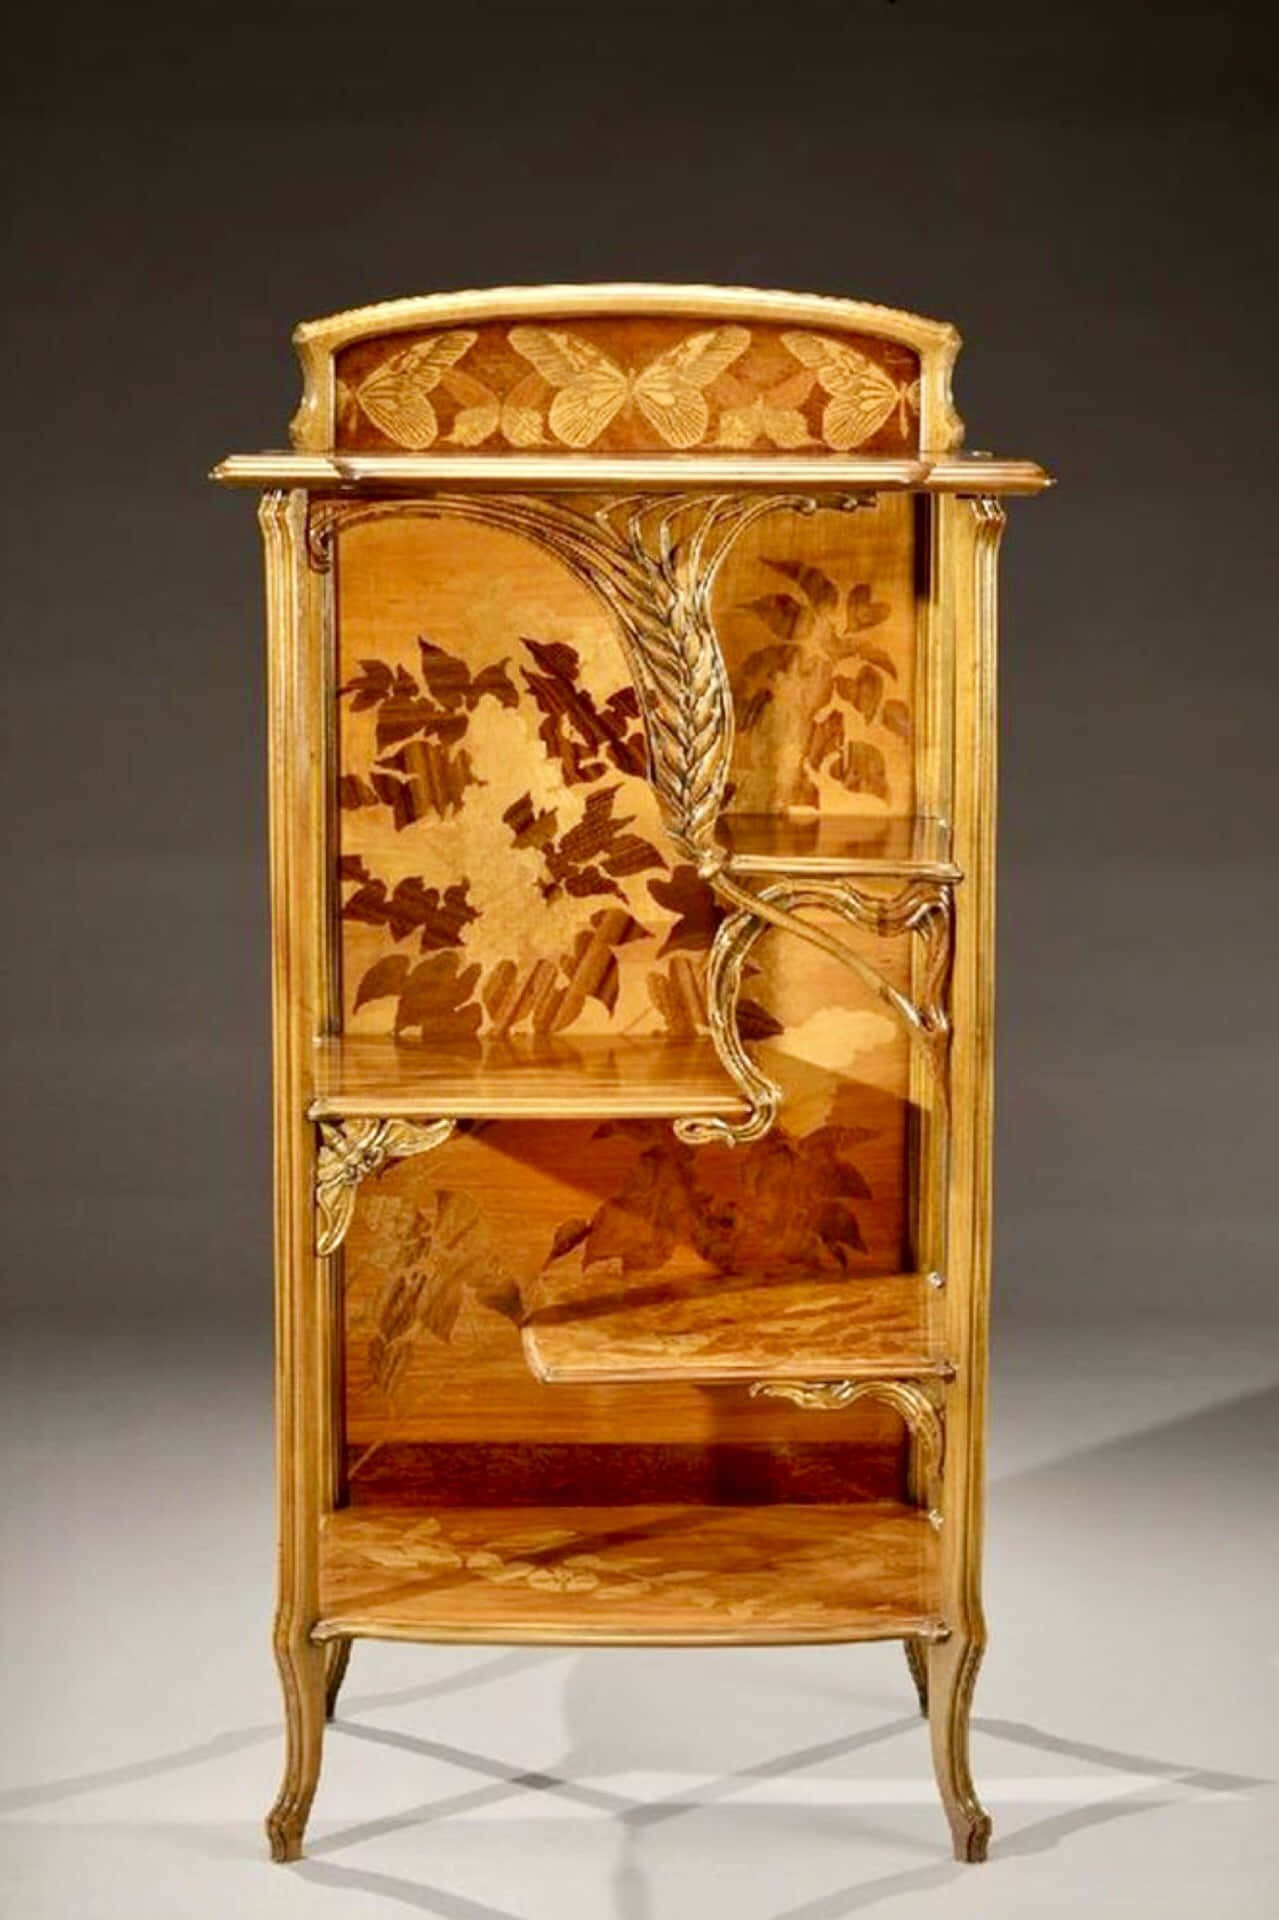 A Wooden Cabinet With A Floral Design On It